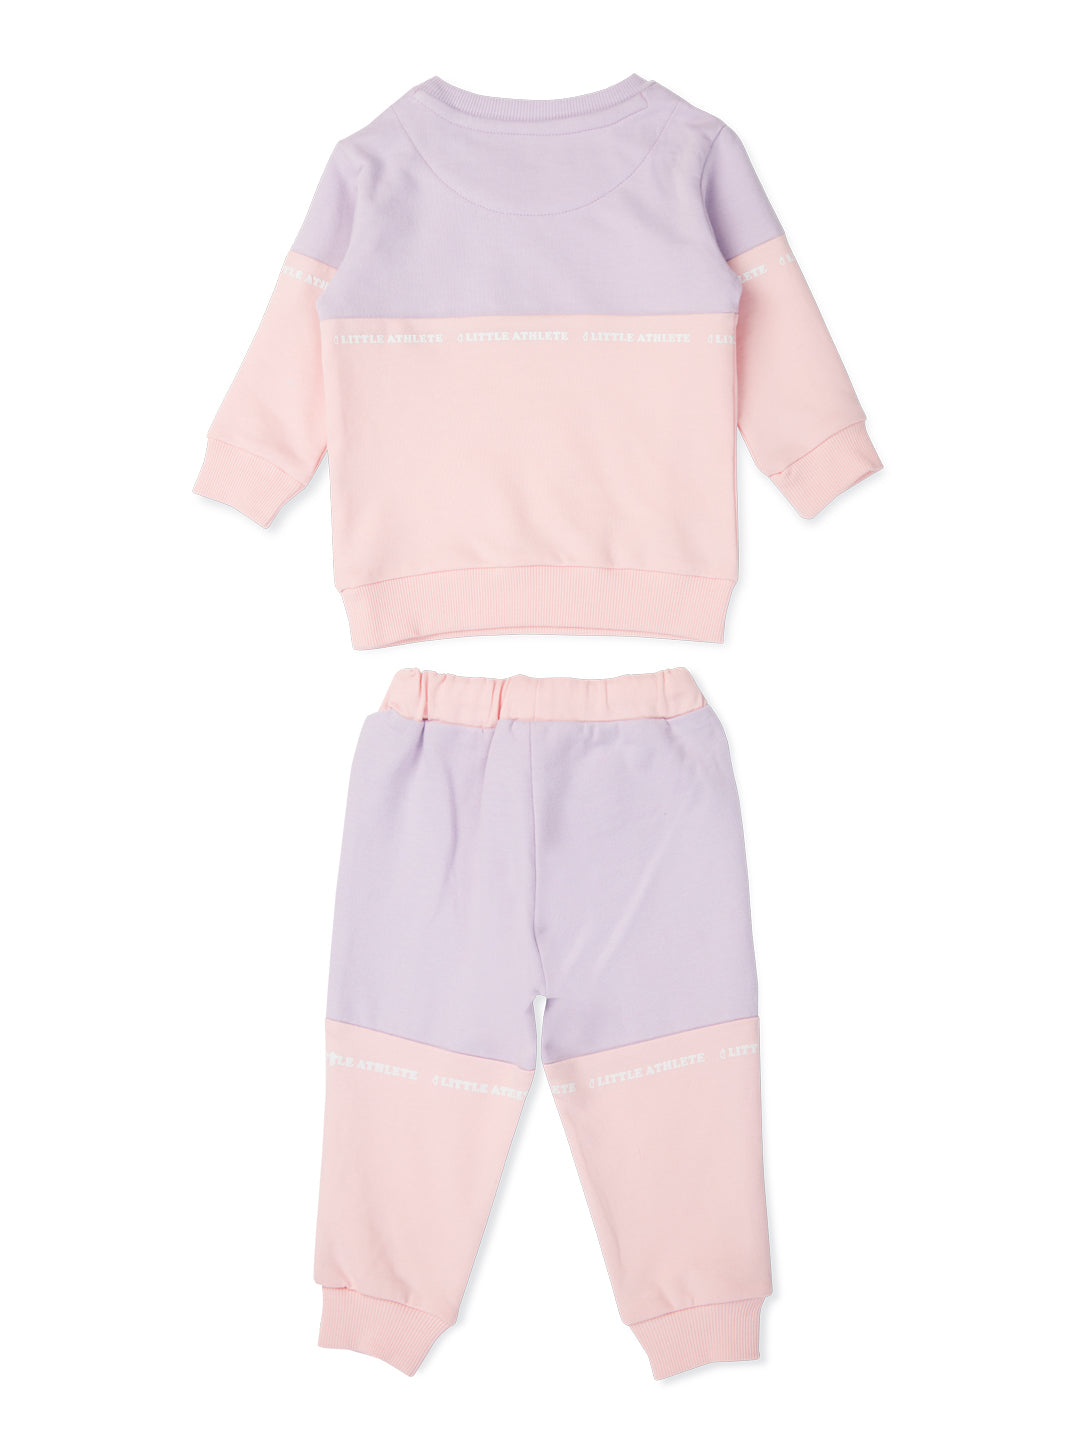 Baby Girls Set of pink round neck knitted cotton t-shirt and pajamas.